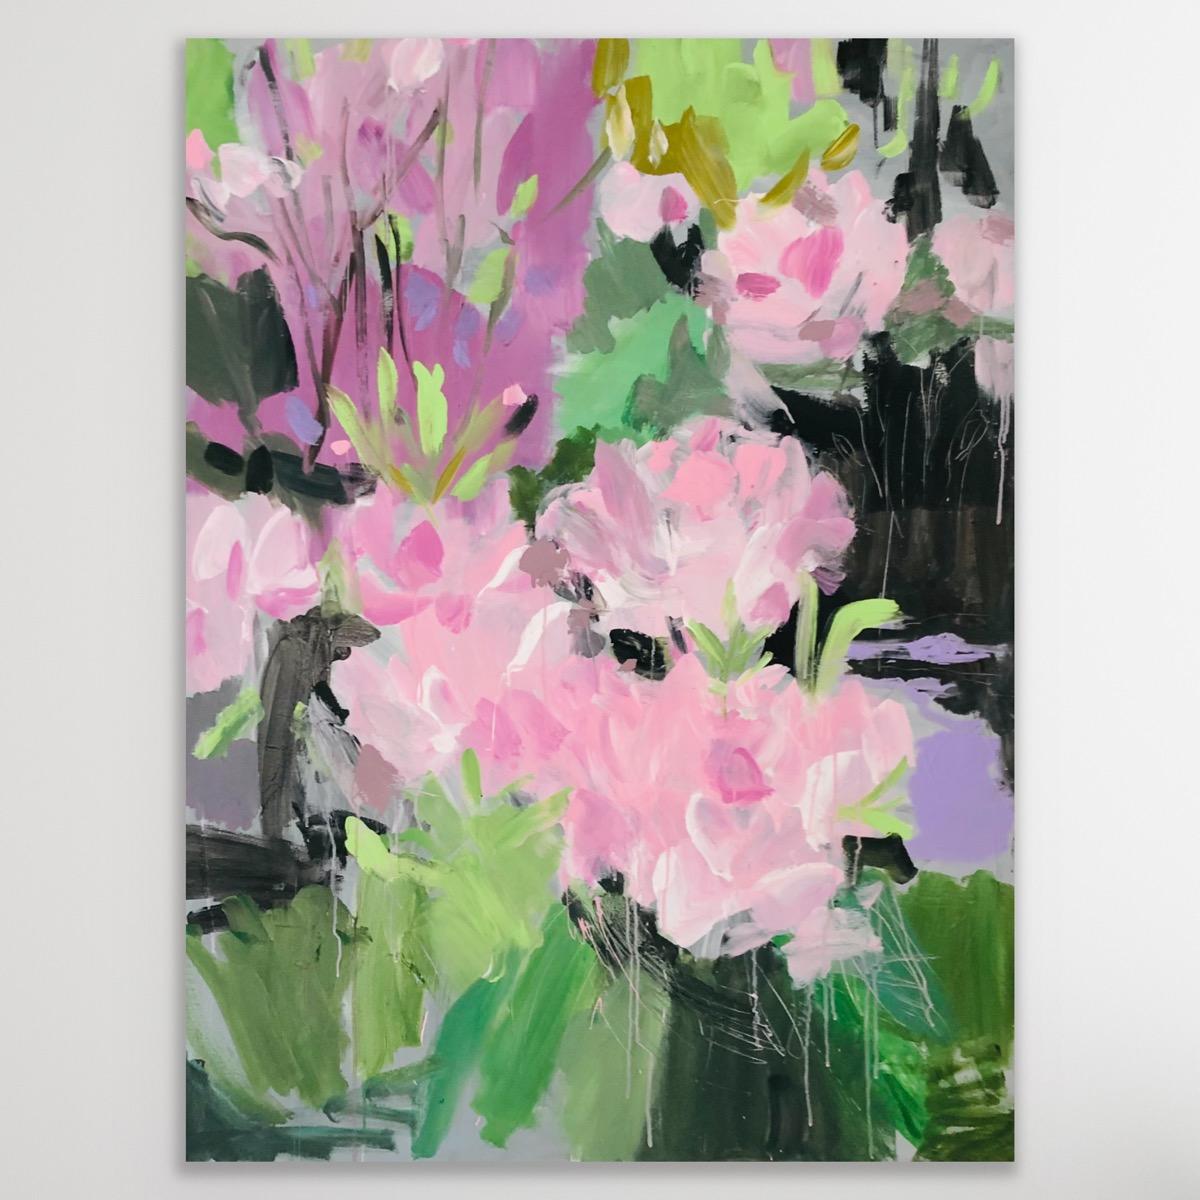 This artwork is inspired by the beauty of summer flowers, and nature in general.

Discover new paintings by artist Sasha Getsko at Wychwood Art. Sasha Getsko creates paintings in an abstract style, using vibrant and vivid colour pallets and working